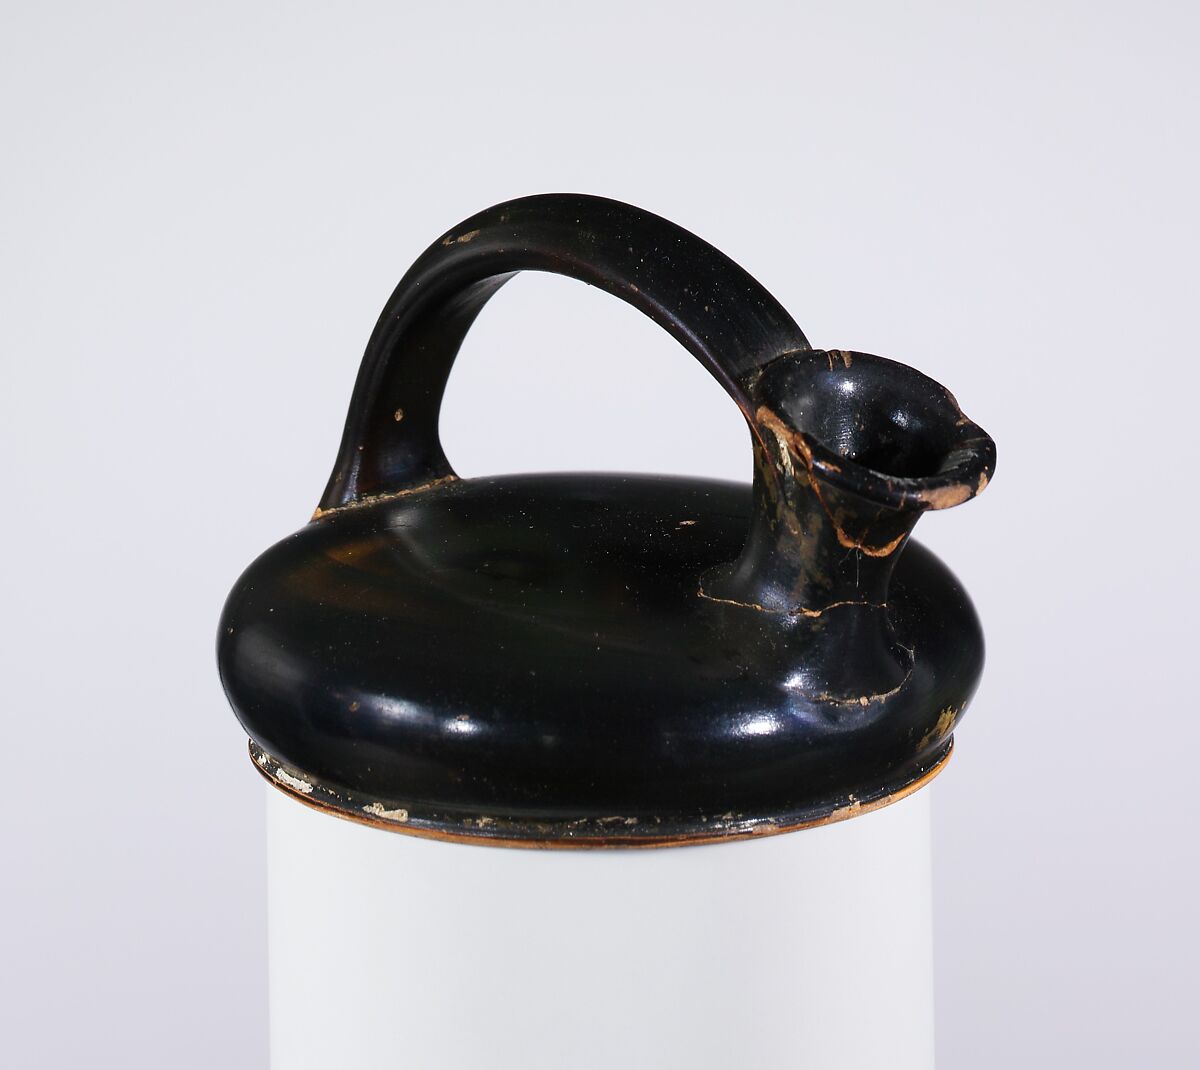 Terracotta askos (flask with a spout and handle over the top), Terracotta, Greek, Attic 